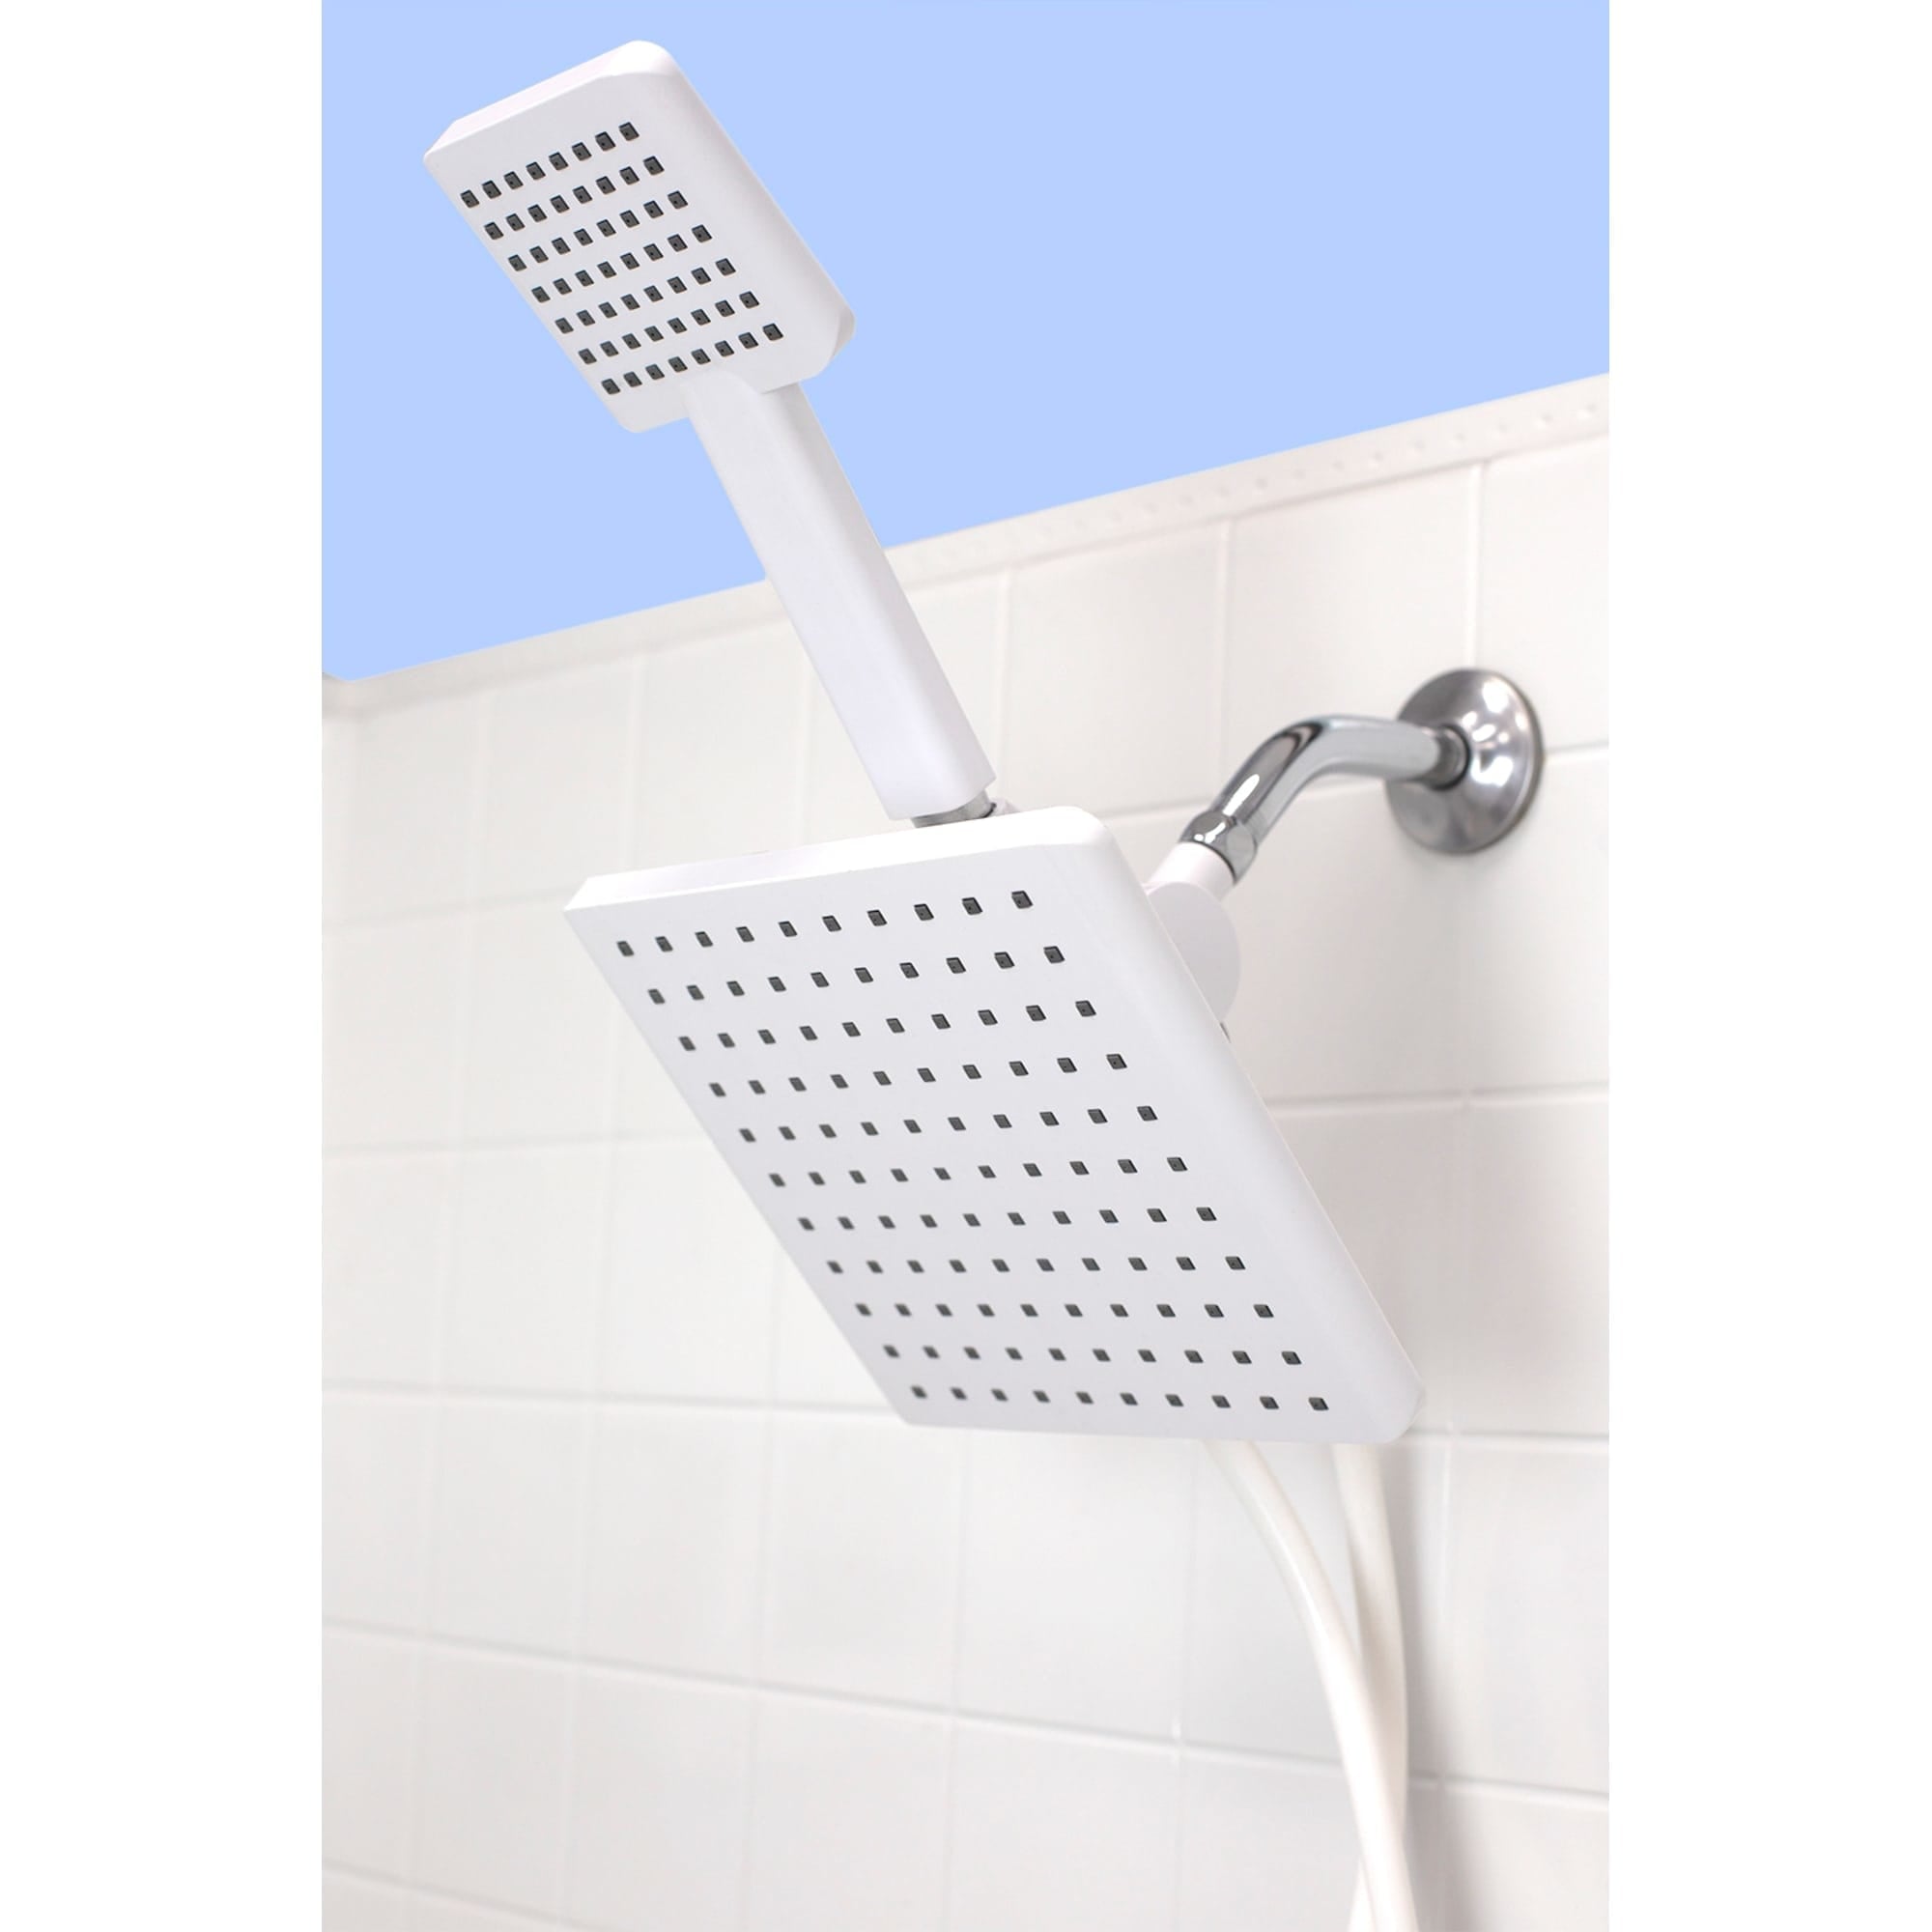 Home Basics Hydrospa Luxe Dual  Function Handheld Shower Massager with Extra Wide Rainfall Shower Head and 5 ft Tangle-Free Hose, White $20.00 EACH, CASE PACK OF 6